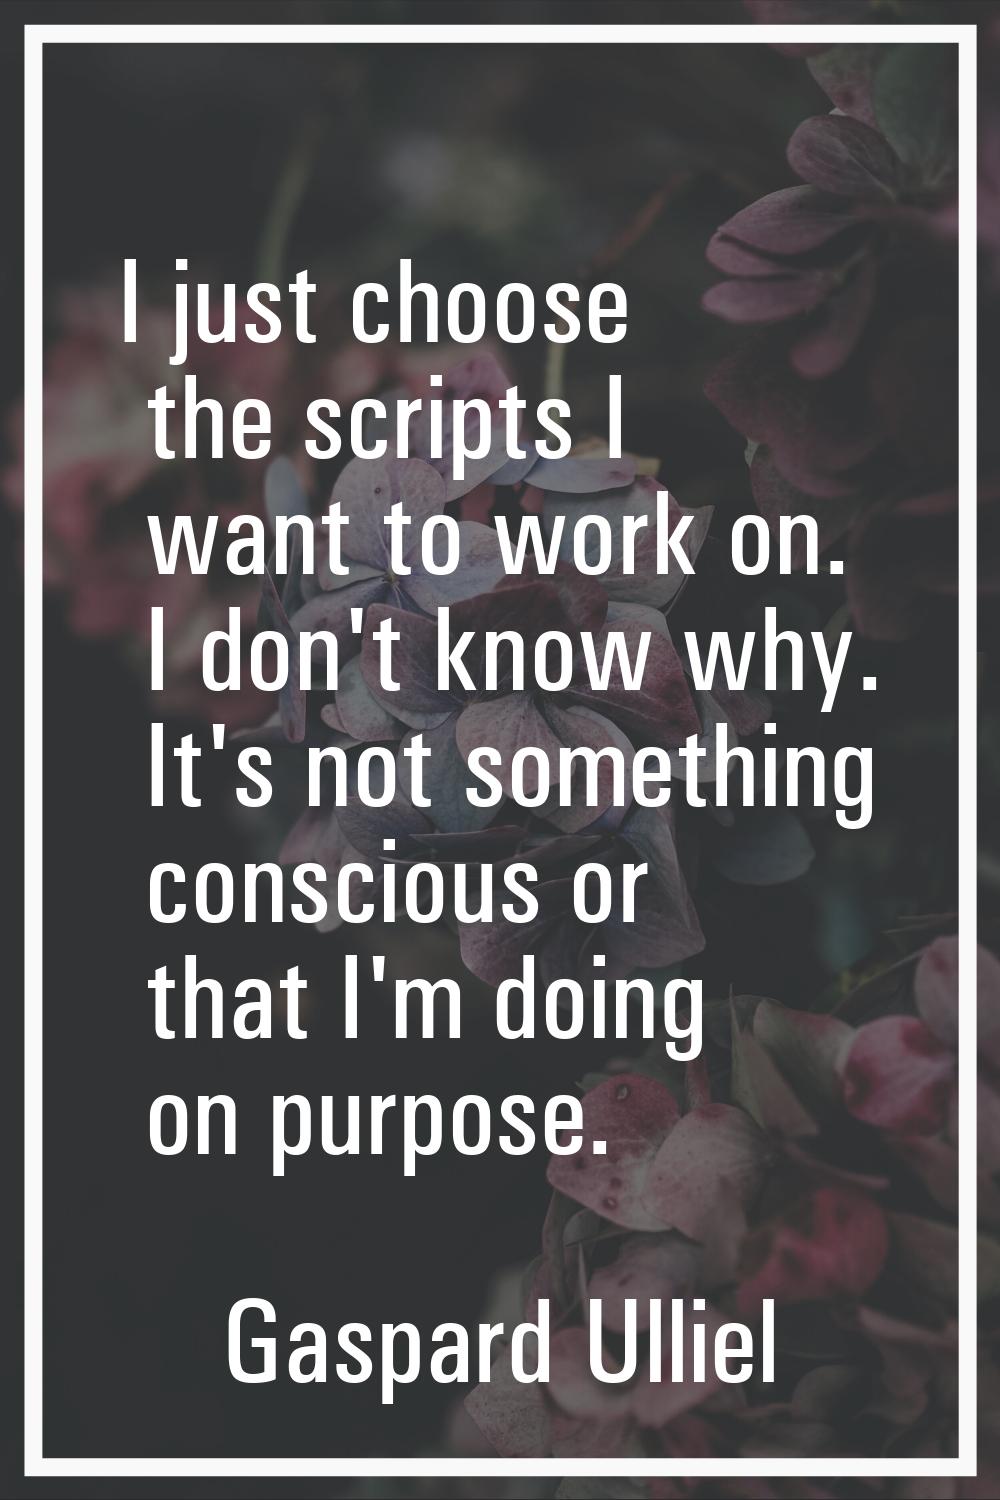 I just choose the scripts I want to work on. I don't know why. It's not something conscious or that